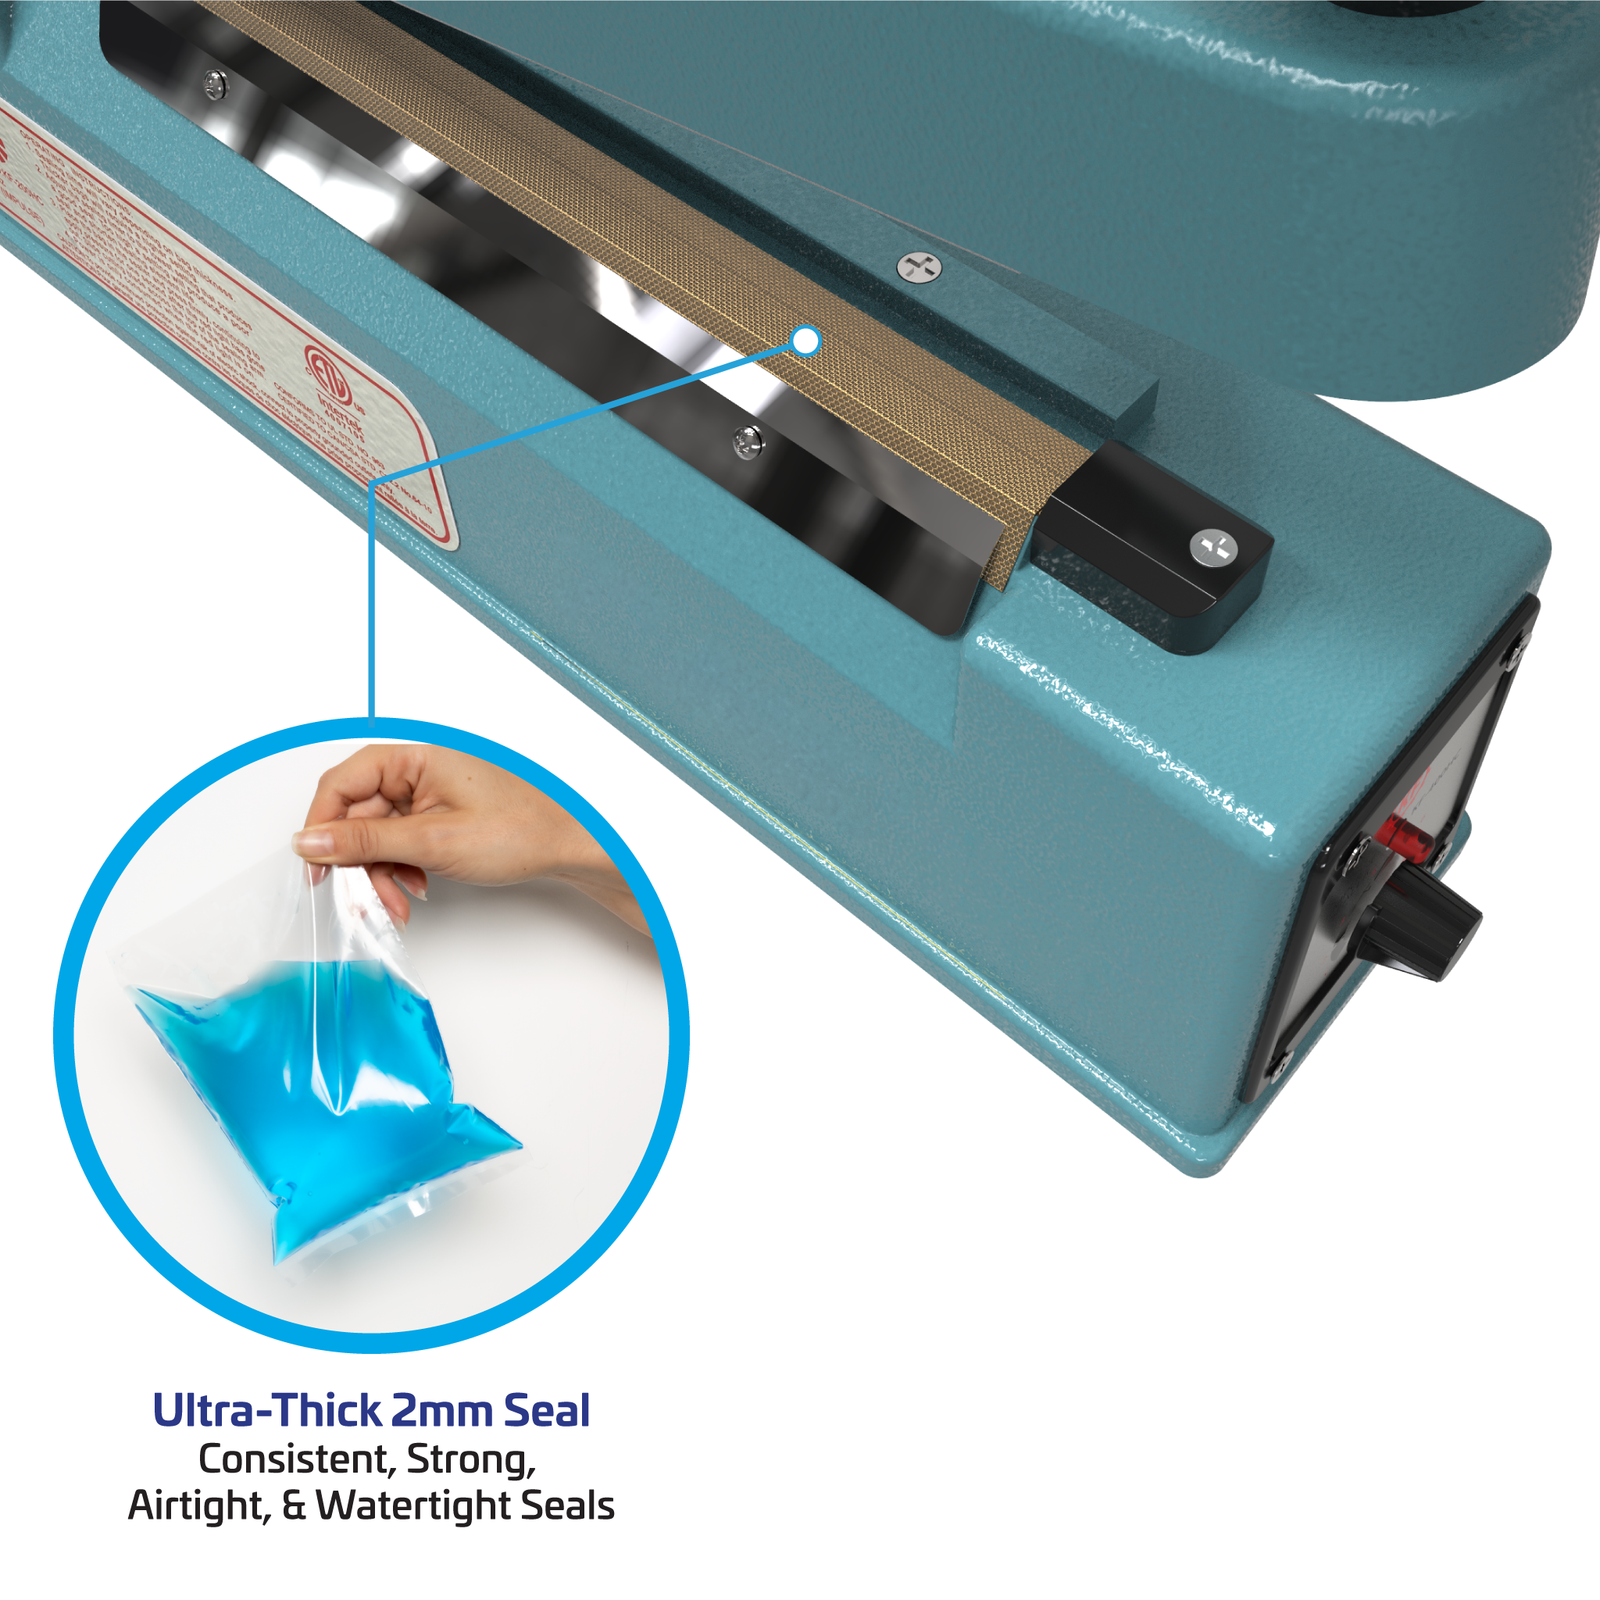 8 inch manual impulse bag sealer over white background. Showing the sealing element. Features read 